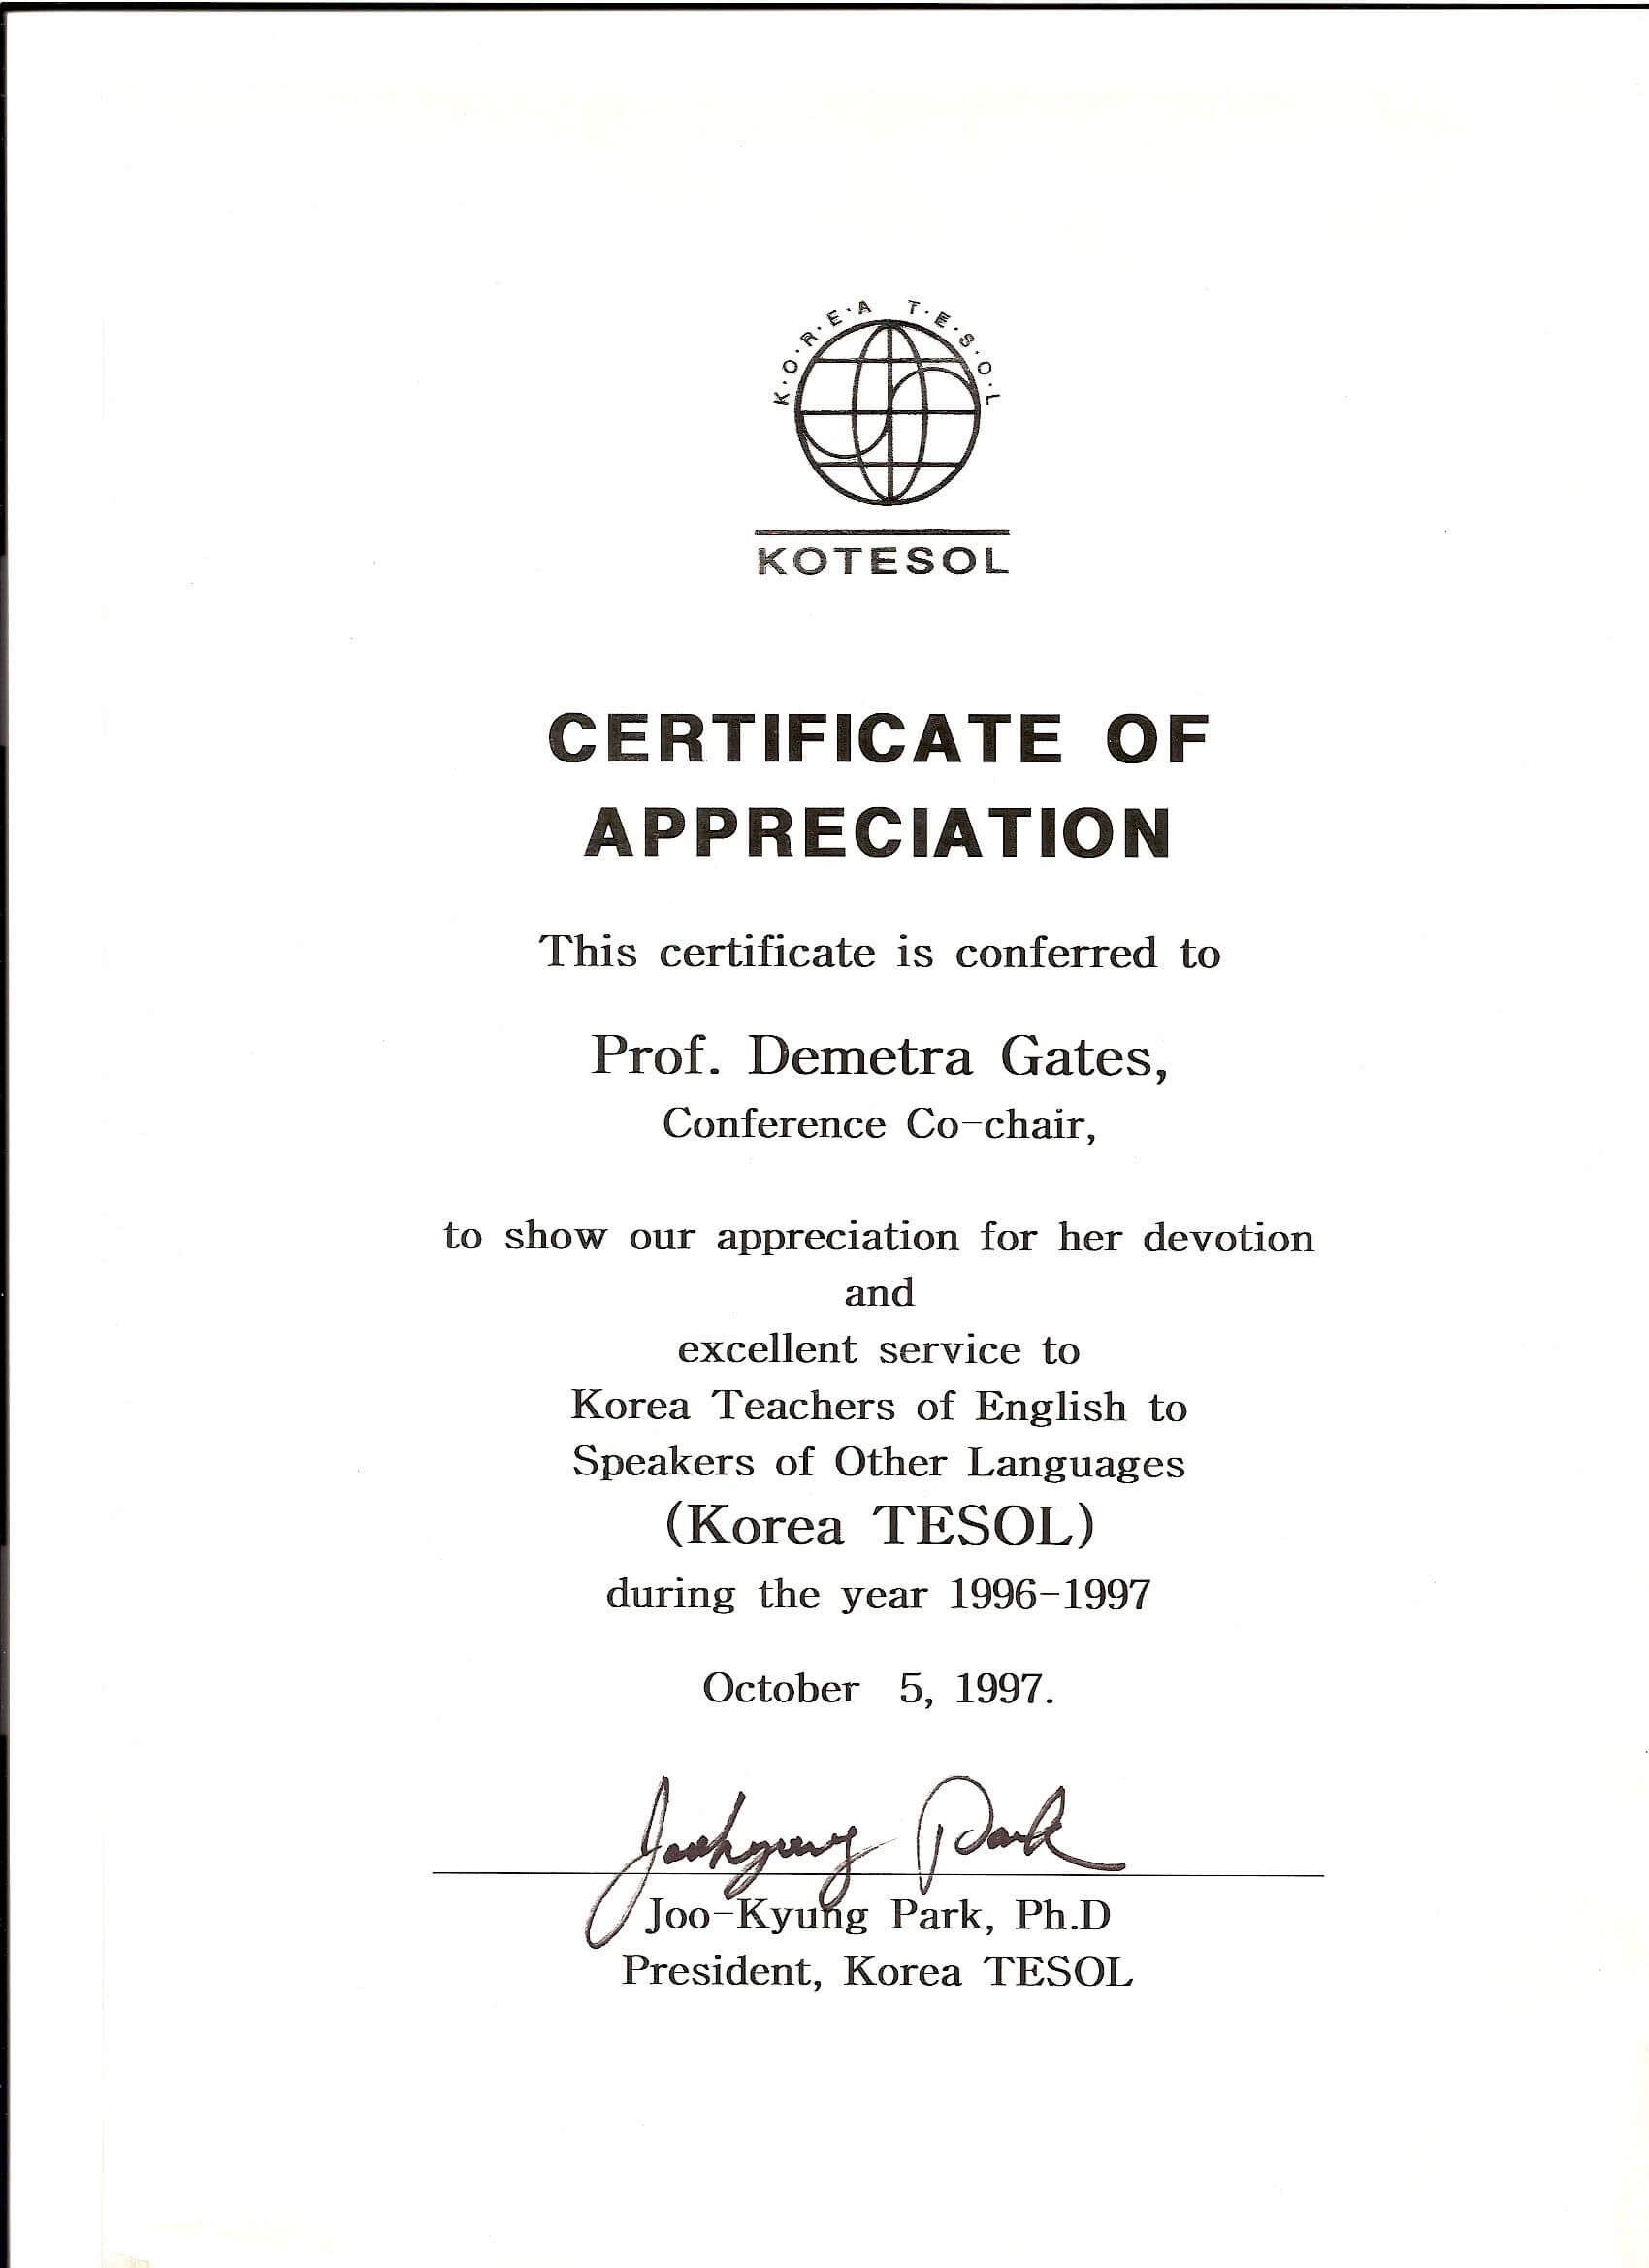 Kotesol Presidential Certificate Of Appreciation (1997 Pertaining To Recognition Of Service Certificate Template